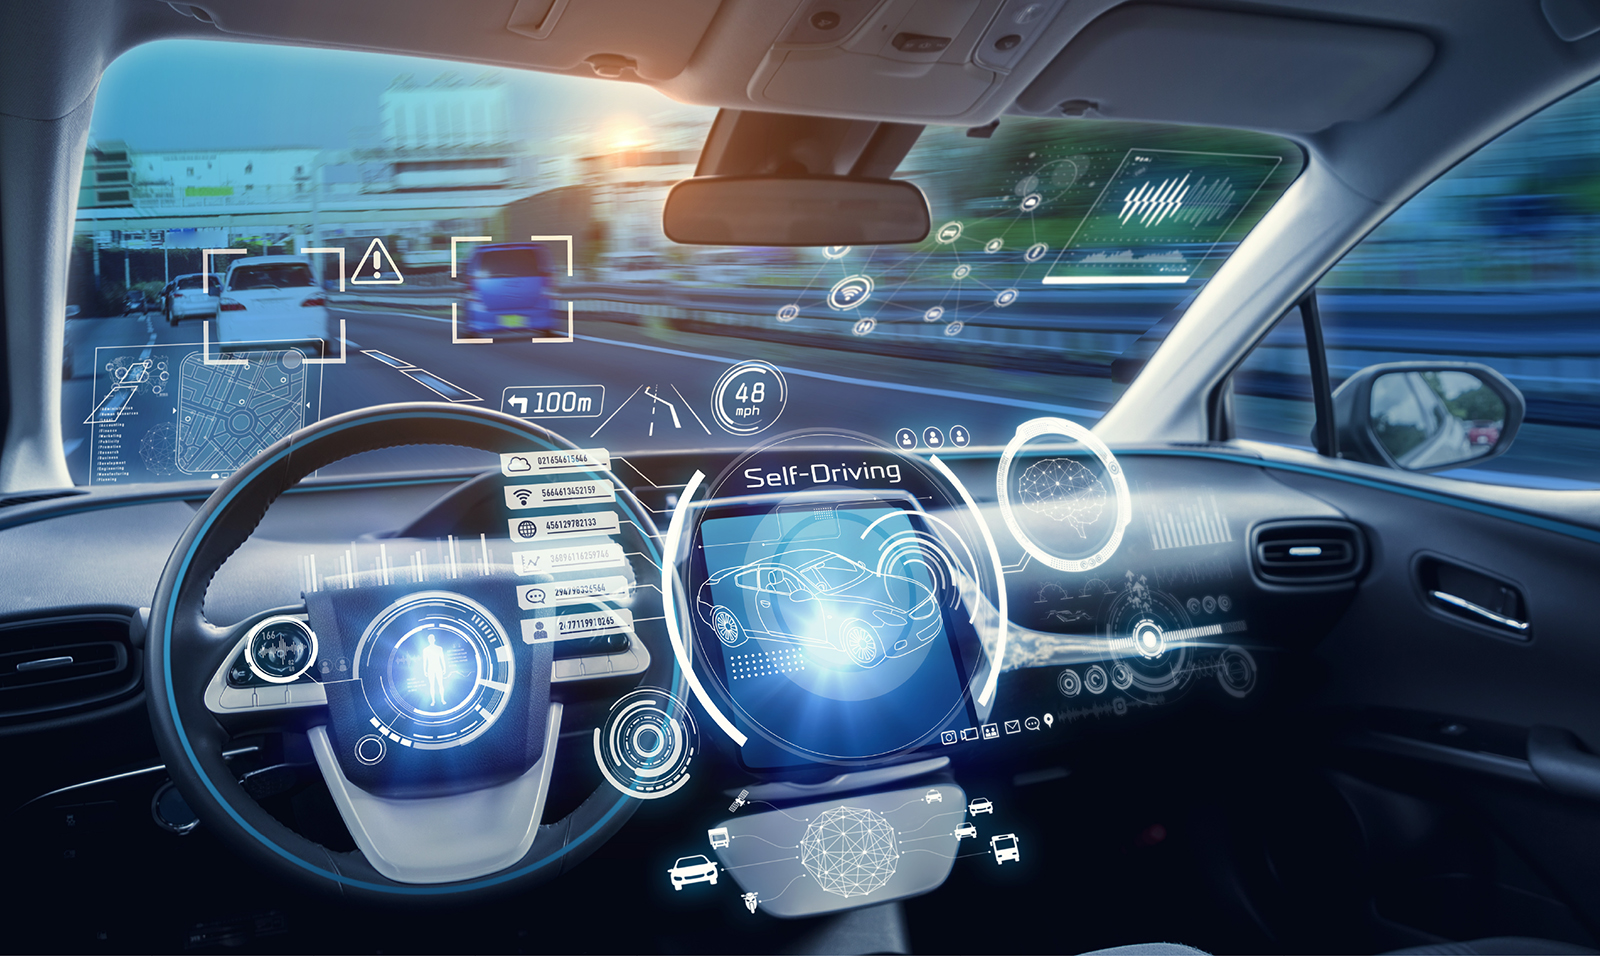 Photo showing dashboard of a self-driving car, with a roadway outside.